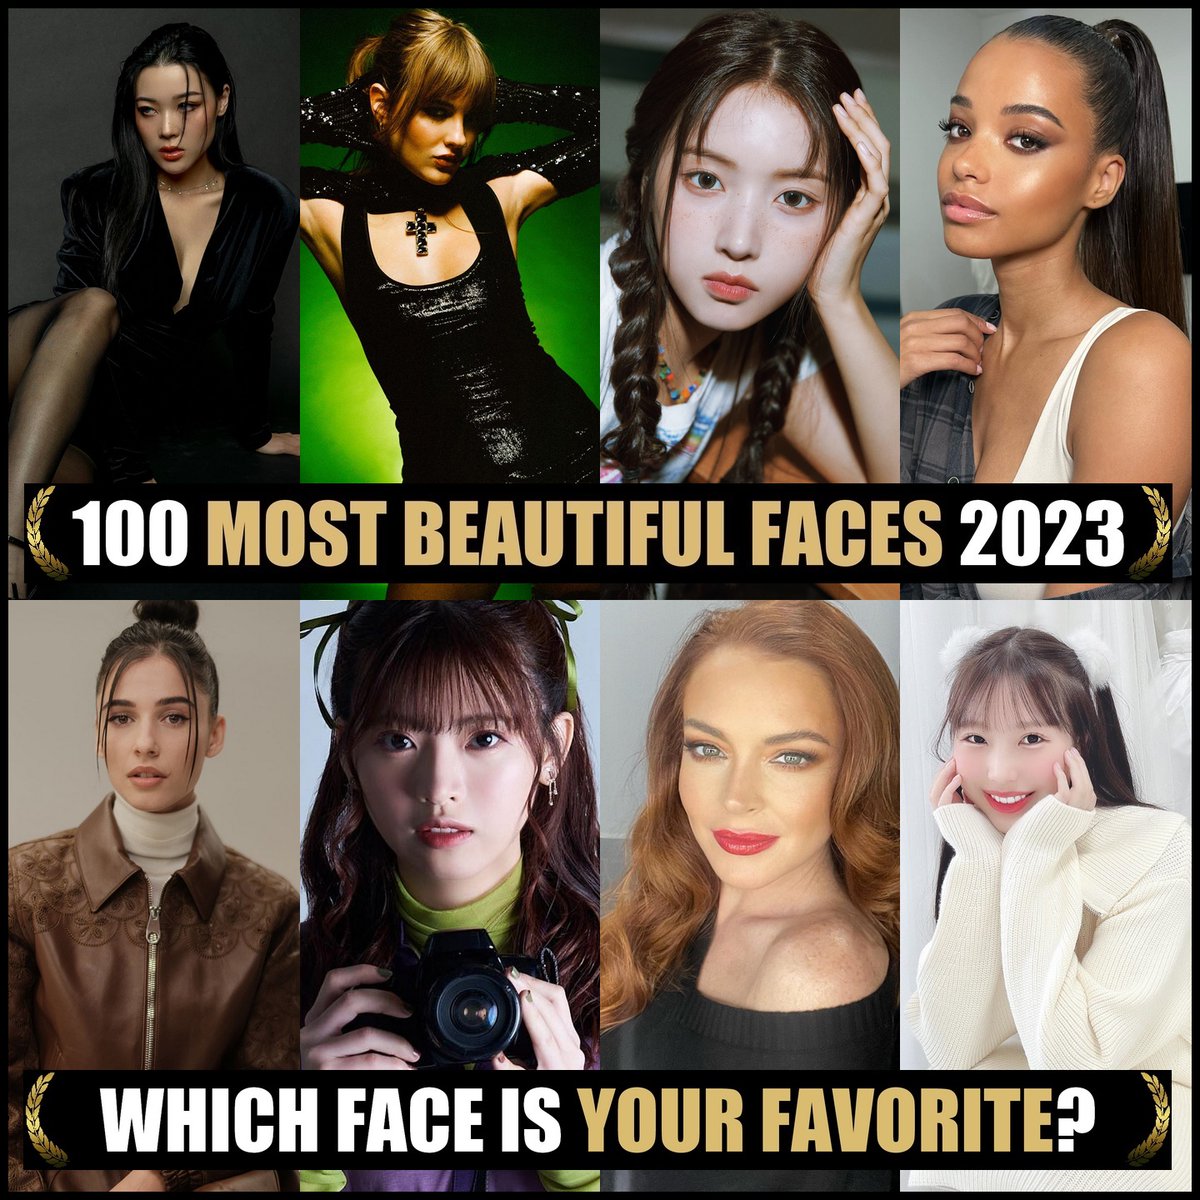 Nominations for 100 Most Beautiful Faces of 2023. Congrats to all! If you would like to nominate & vote please join our Patreon (Link in Bio). #TCCandler #100faces2023 #emilymei #emilyghoul #victoriadeangelis #maneskin #JIWOO #NMIXX #naomiscott #akb48 #machialing #LINDSAYLOHAN